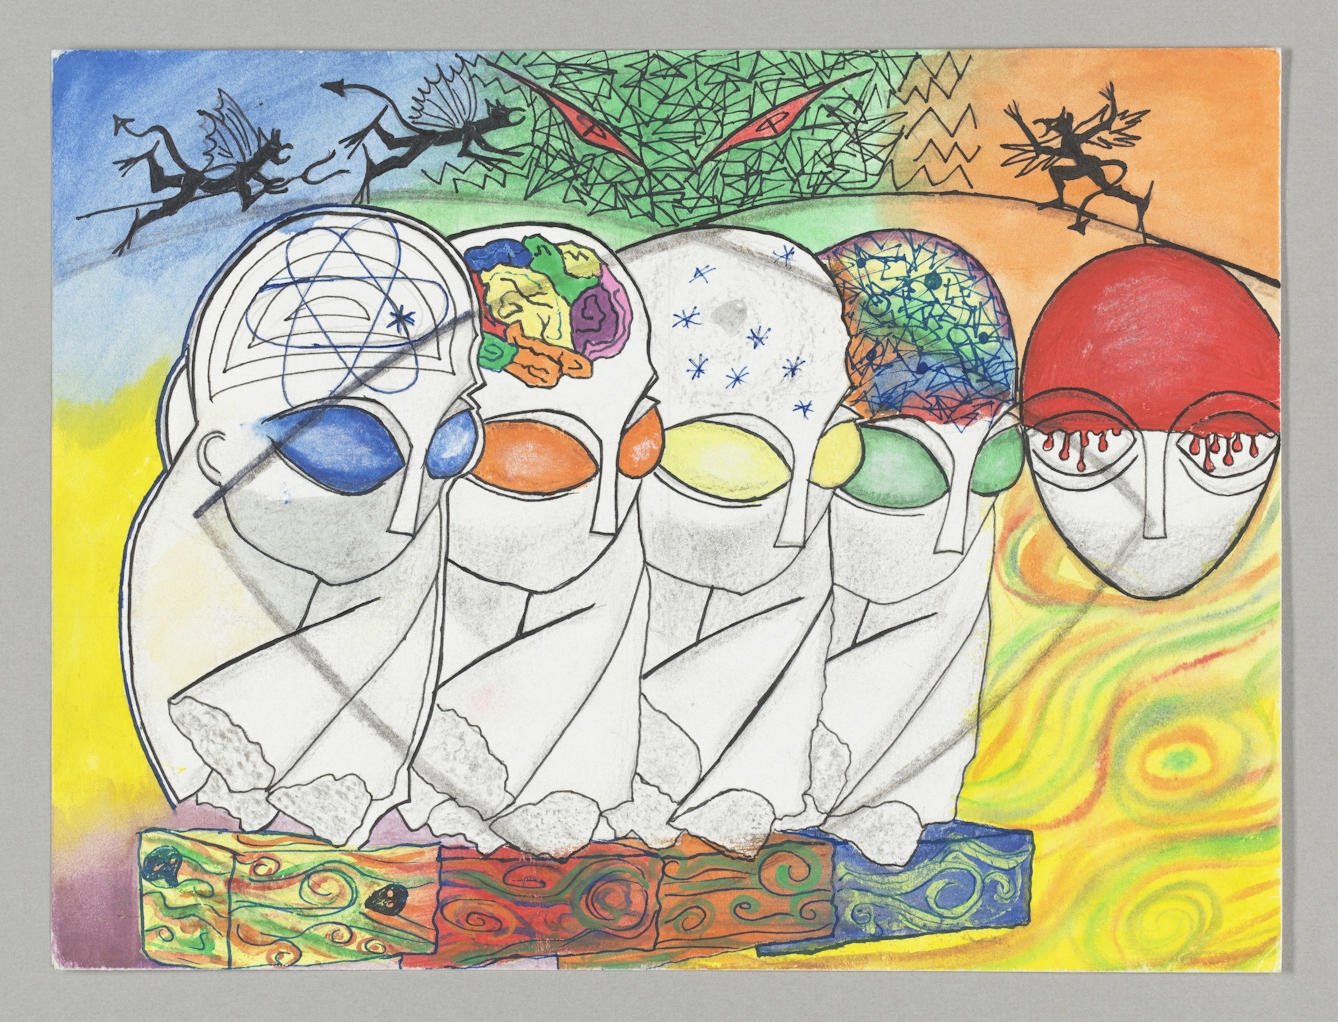 Four white figures with large mask-like heads are at the centre of the painting. They have large almond-shaped eyes in blue, orange, yellow and green respectively, from left to right. Each has a different drawing in the crown of the head: a rough atomic line drawing, a multicoloured bran, several asterisk type stars  and a blue scrbble on a multicoloured backround. To the left of the four figures is a floating mask head looking face-on at the viewer. It has red 'blood' flowing over it with droplets up to the almond shaped eyes. In the multicoloured and patterned background are small black 'devils' with raged wings, tails and one has a pitchfork.